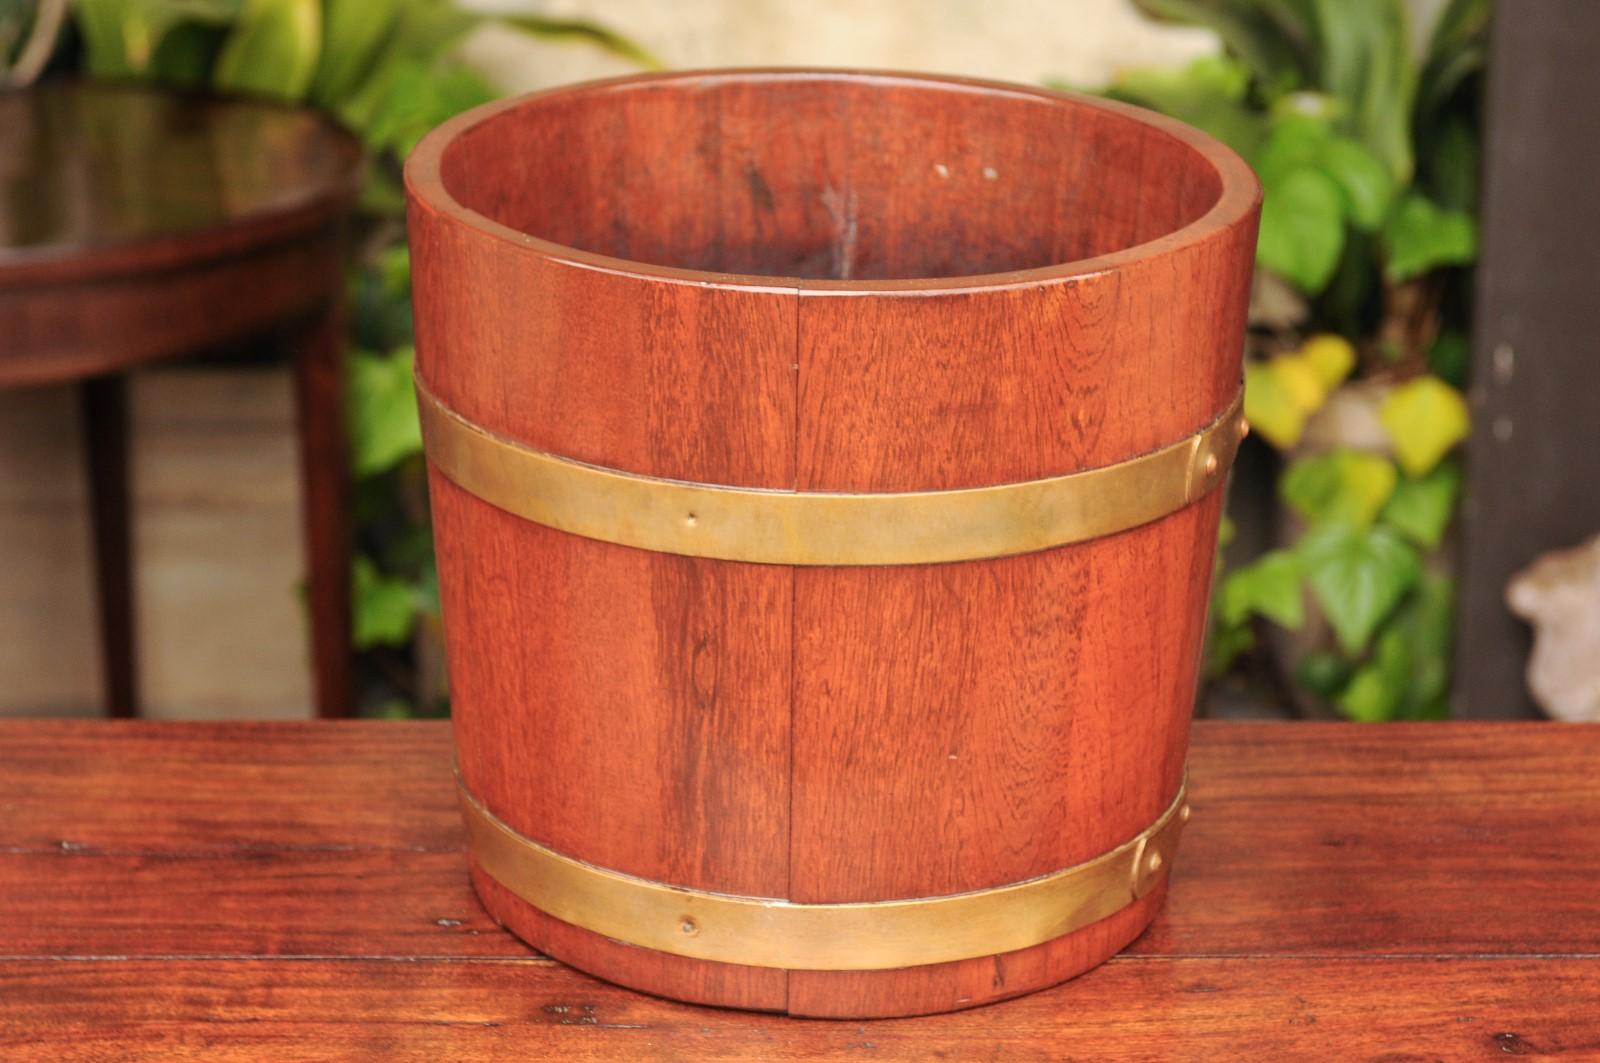 An English Edwardian period R.A Lister & Co. oak bucket from the early 20th century, with brass braces. Born in England in the early years of the short Edwardian reign, this charming bucket features a nice oak body, secured behind two horizontal